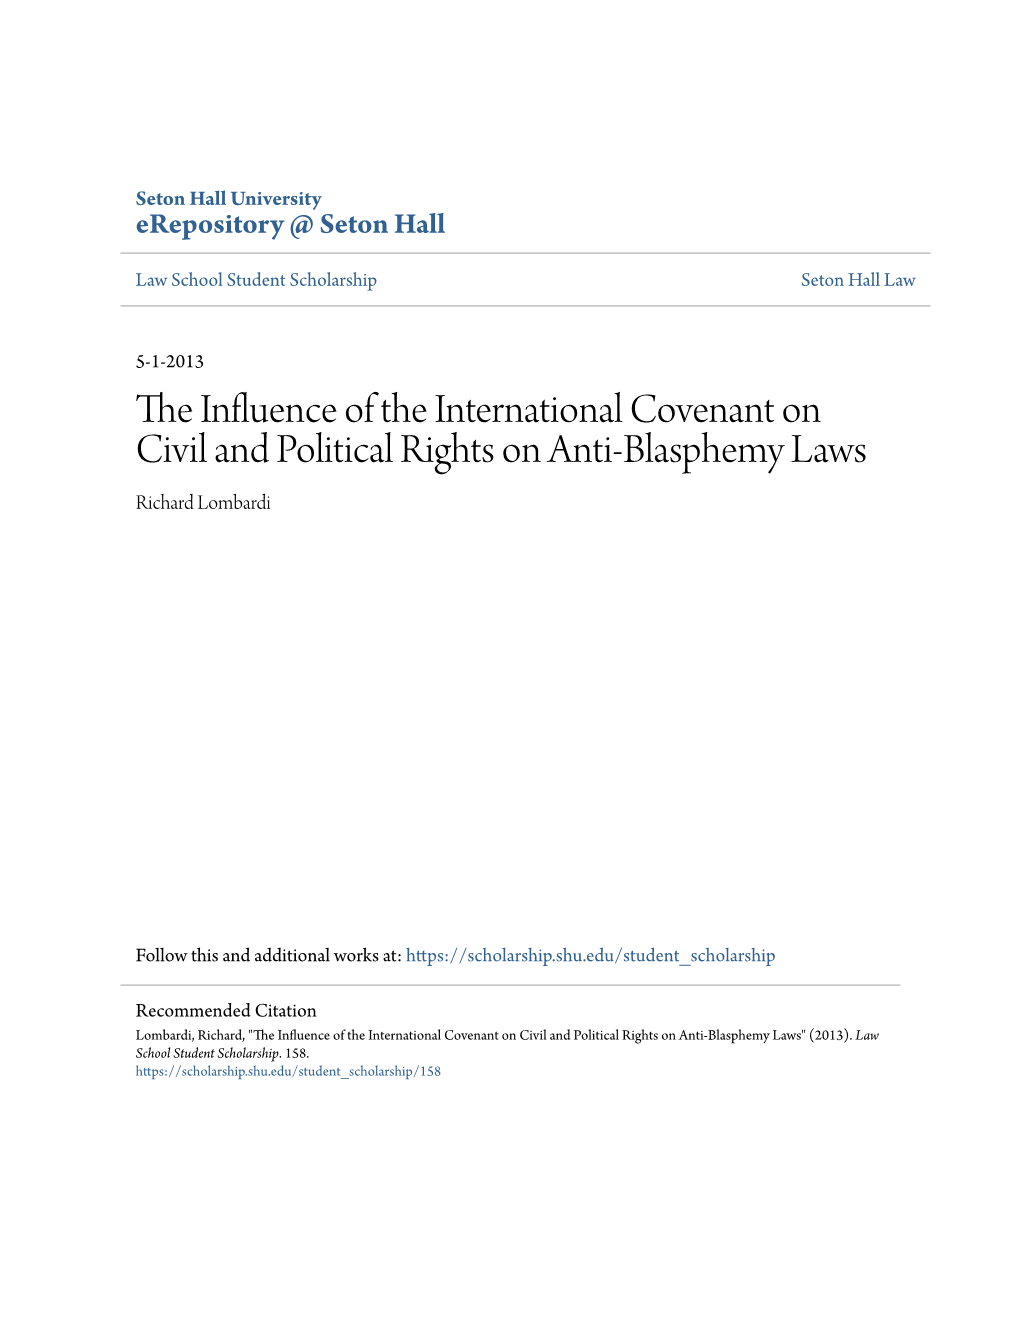 The Influence of the International Covenant on Civil and Political Rights on Anti-Blasphemy Laws